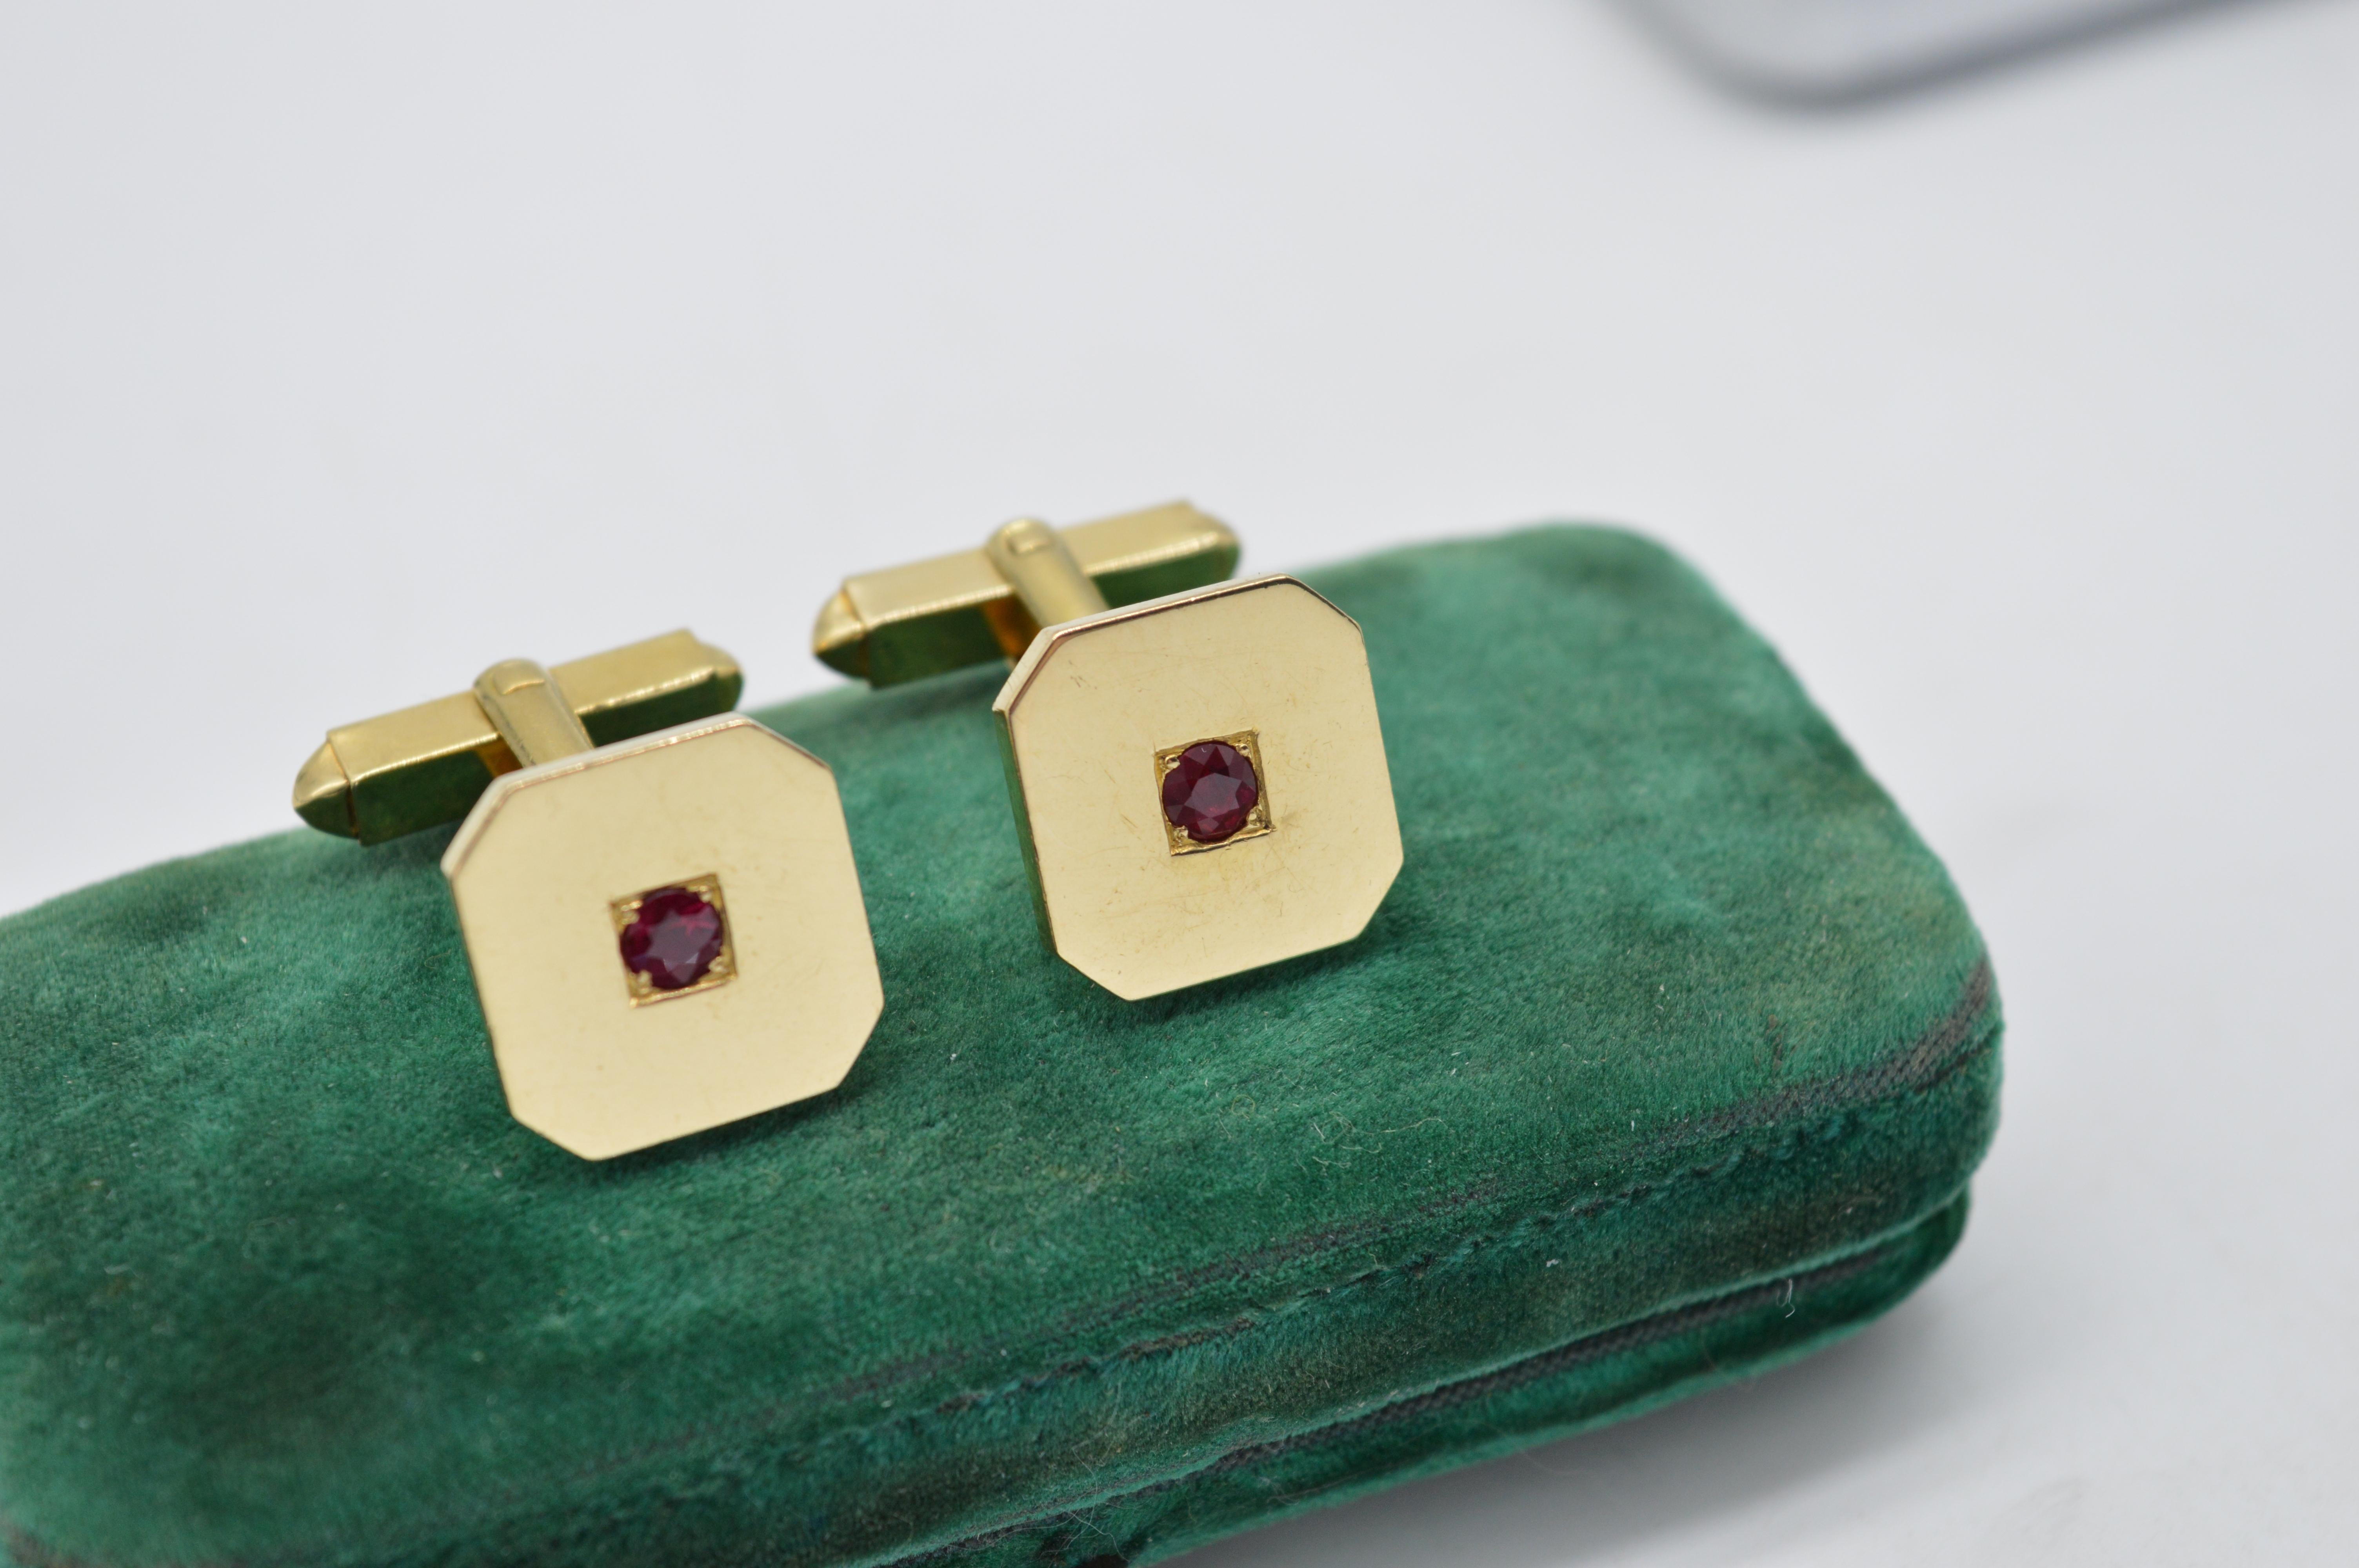 Brilliant Cut Heavy 18ct Gold Cufflinks Polished square inset with Rich Red Rubies 0.5tcw